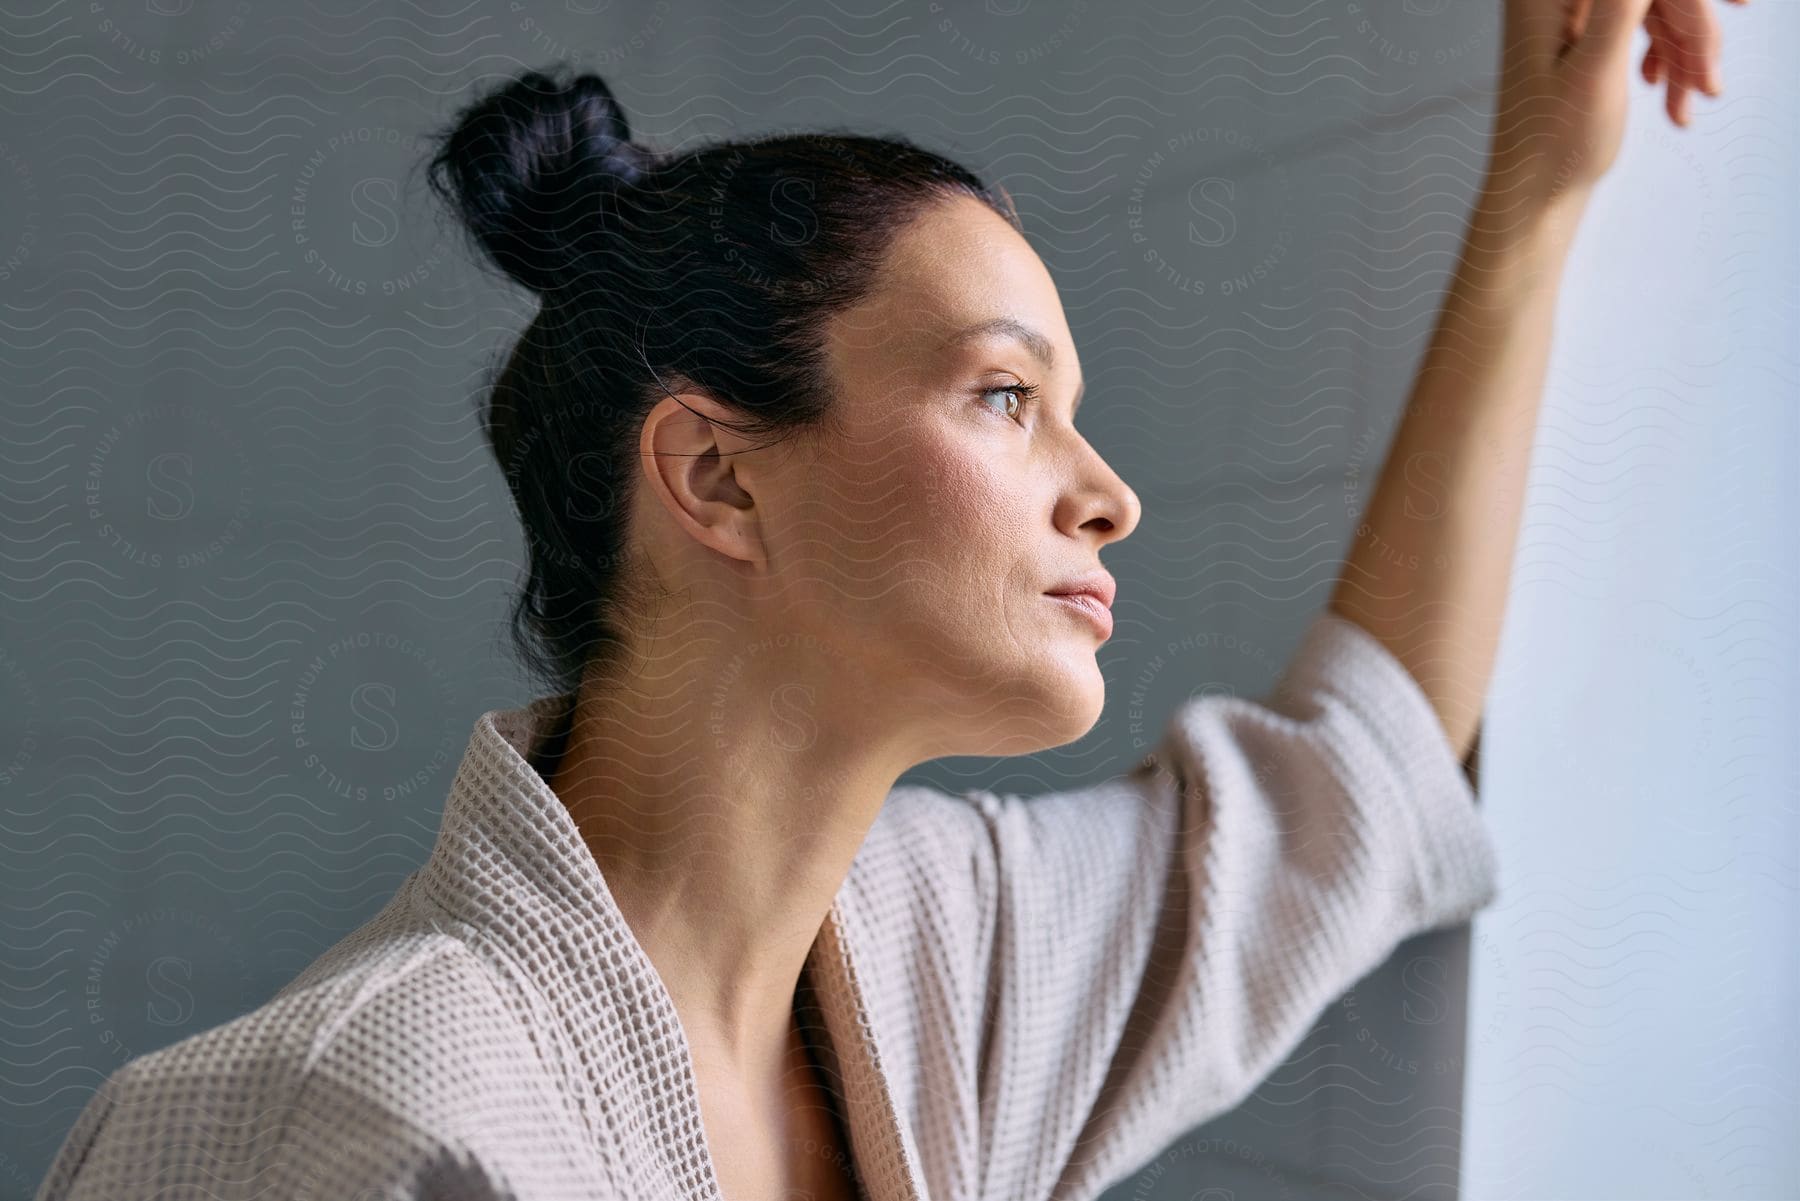 Woman wearing blush and a robe leans against bathroom wall while looking out the window.